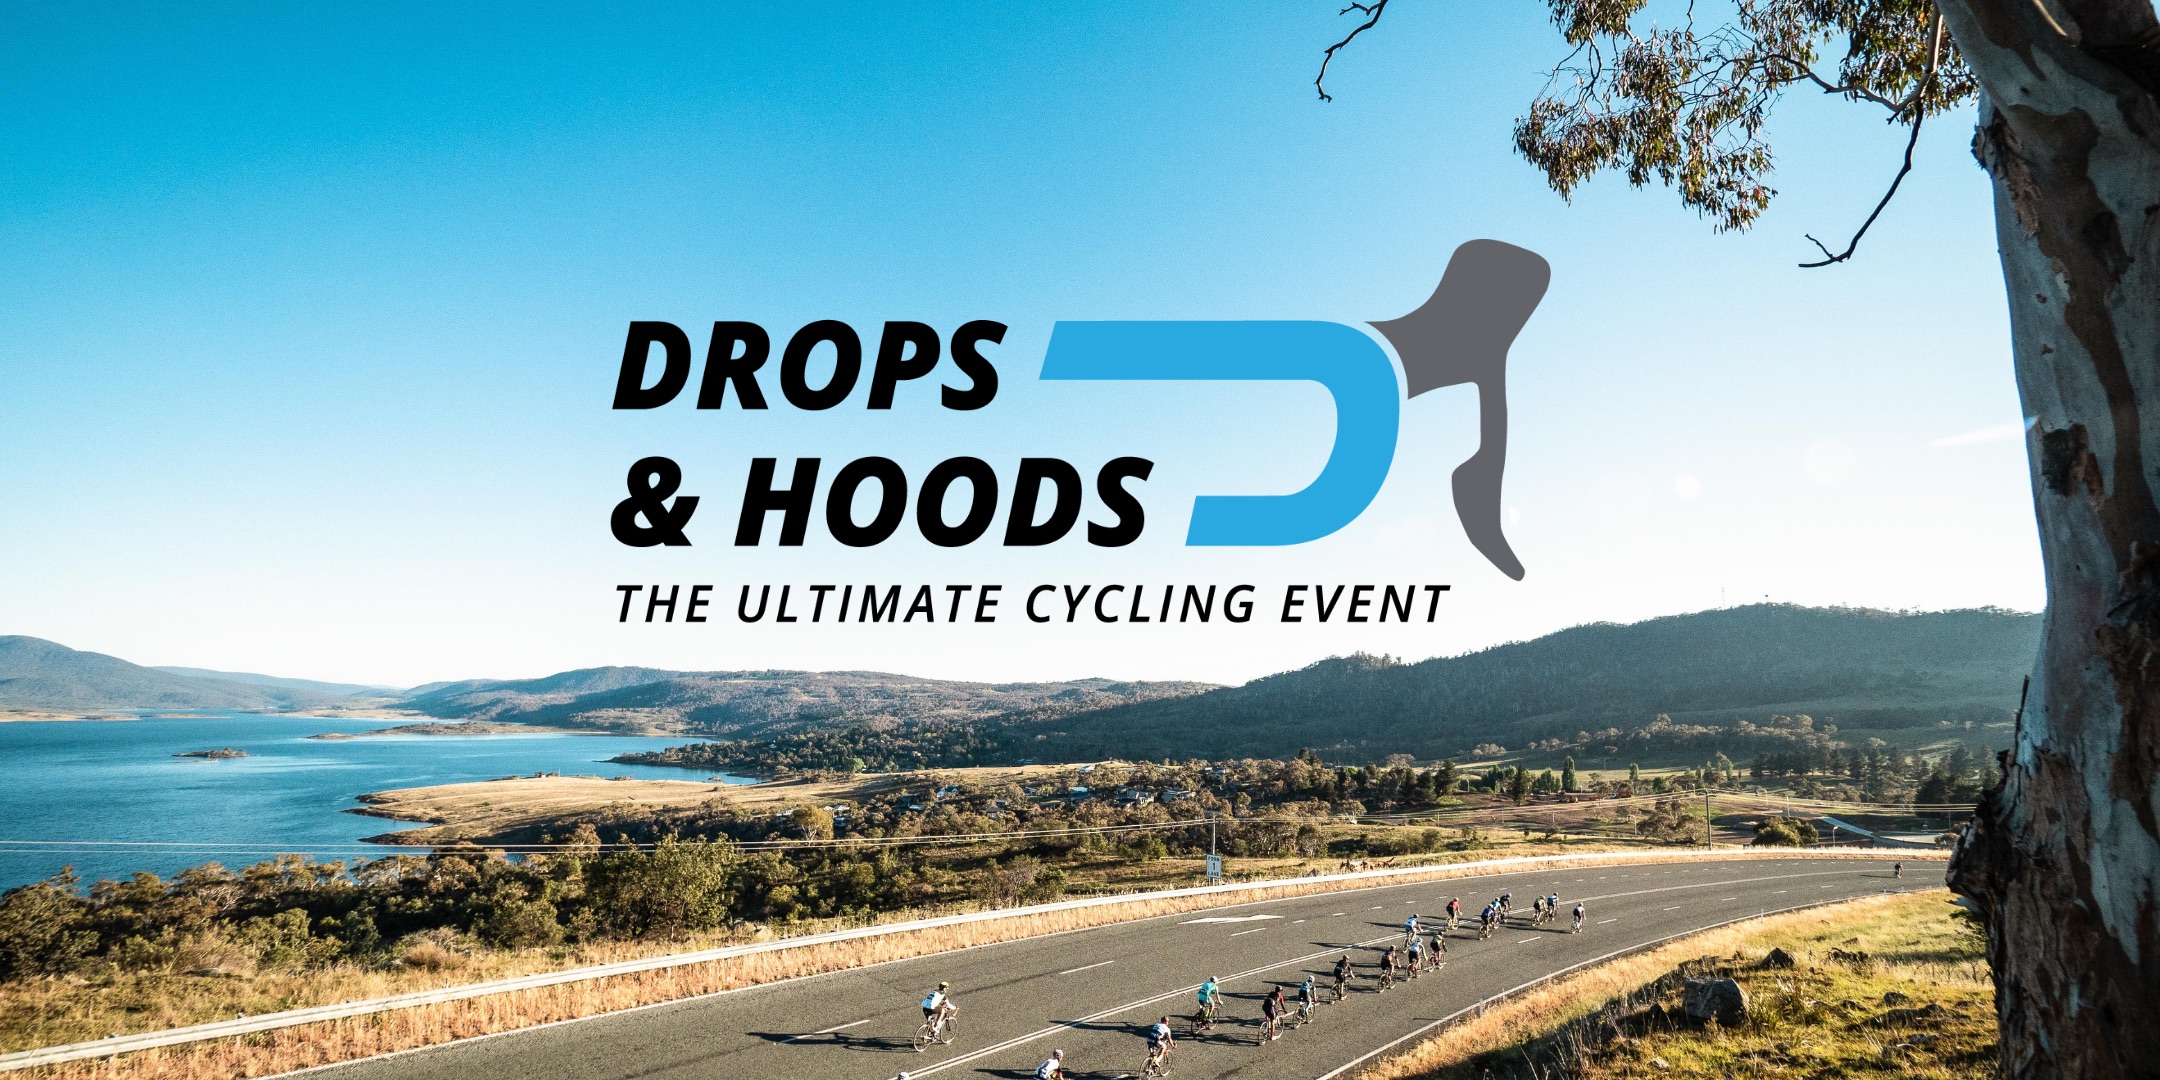 Drops and Hoods - A New Series of Cycling Events for the Snowy Mountains